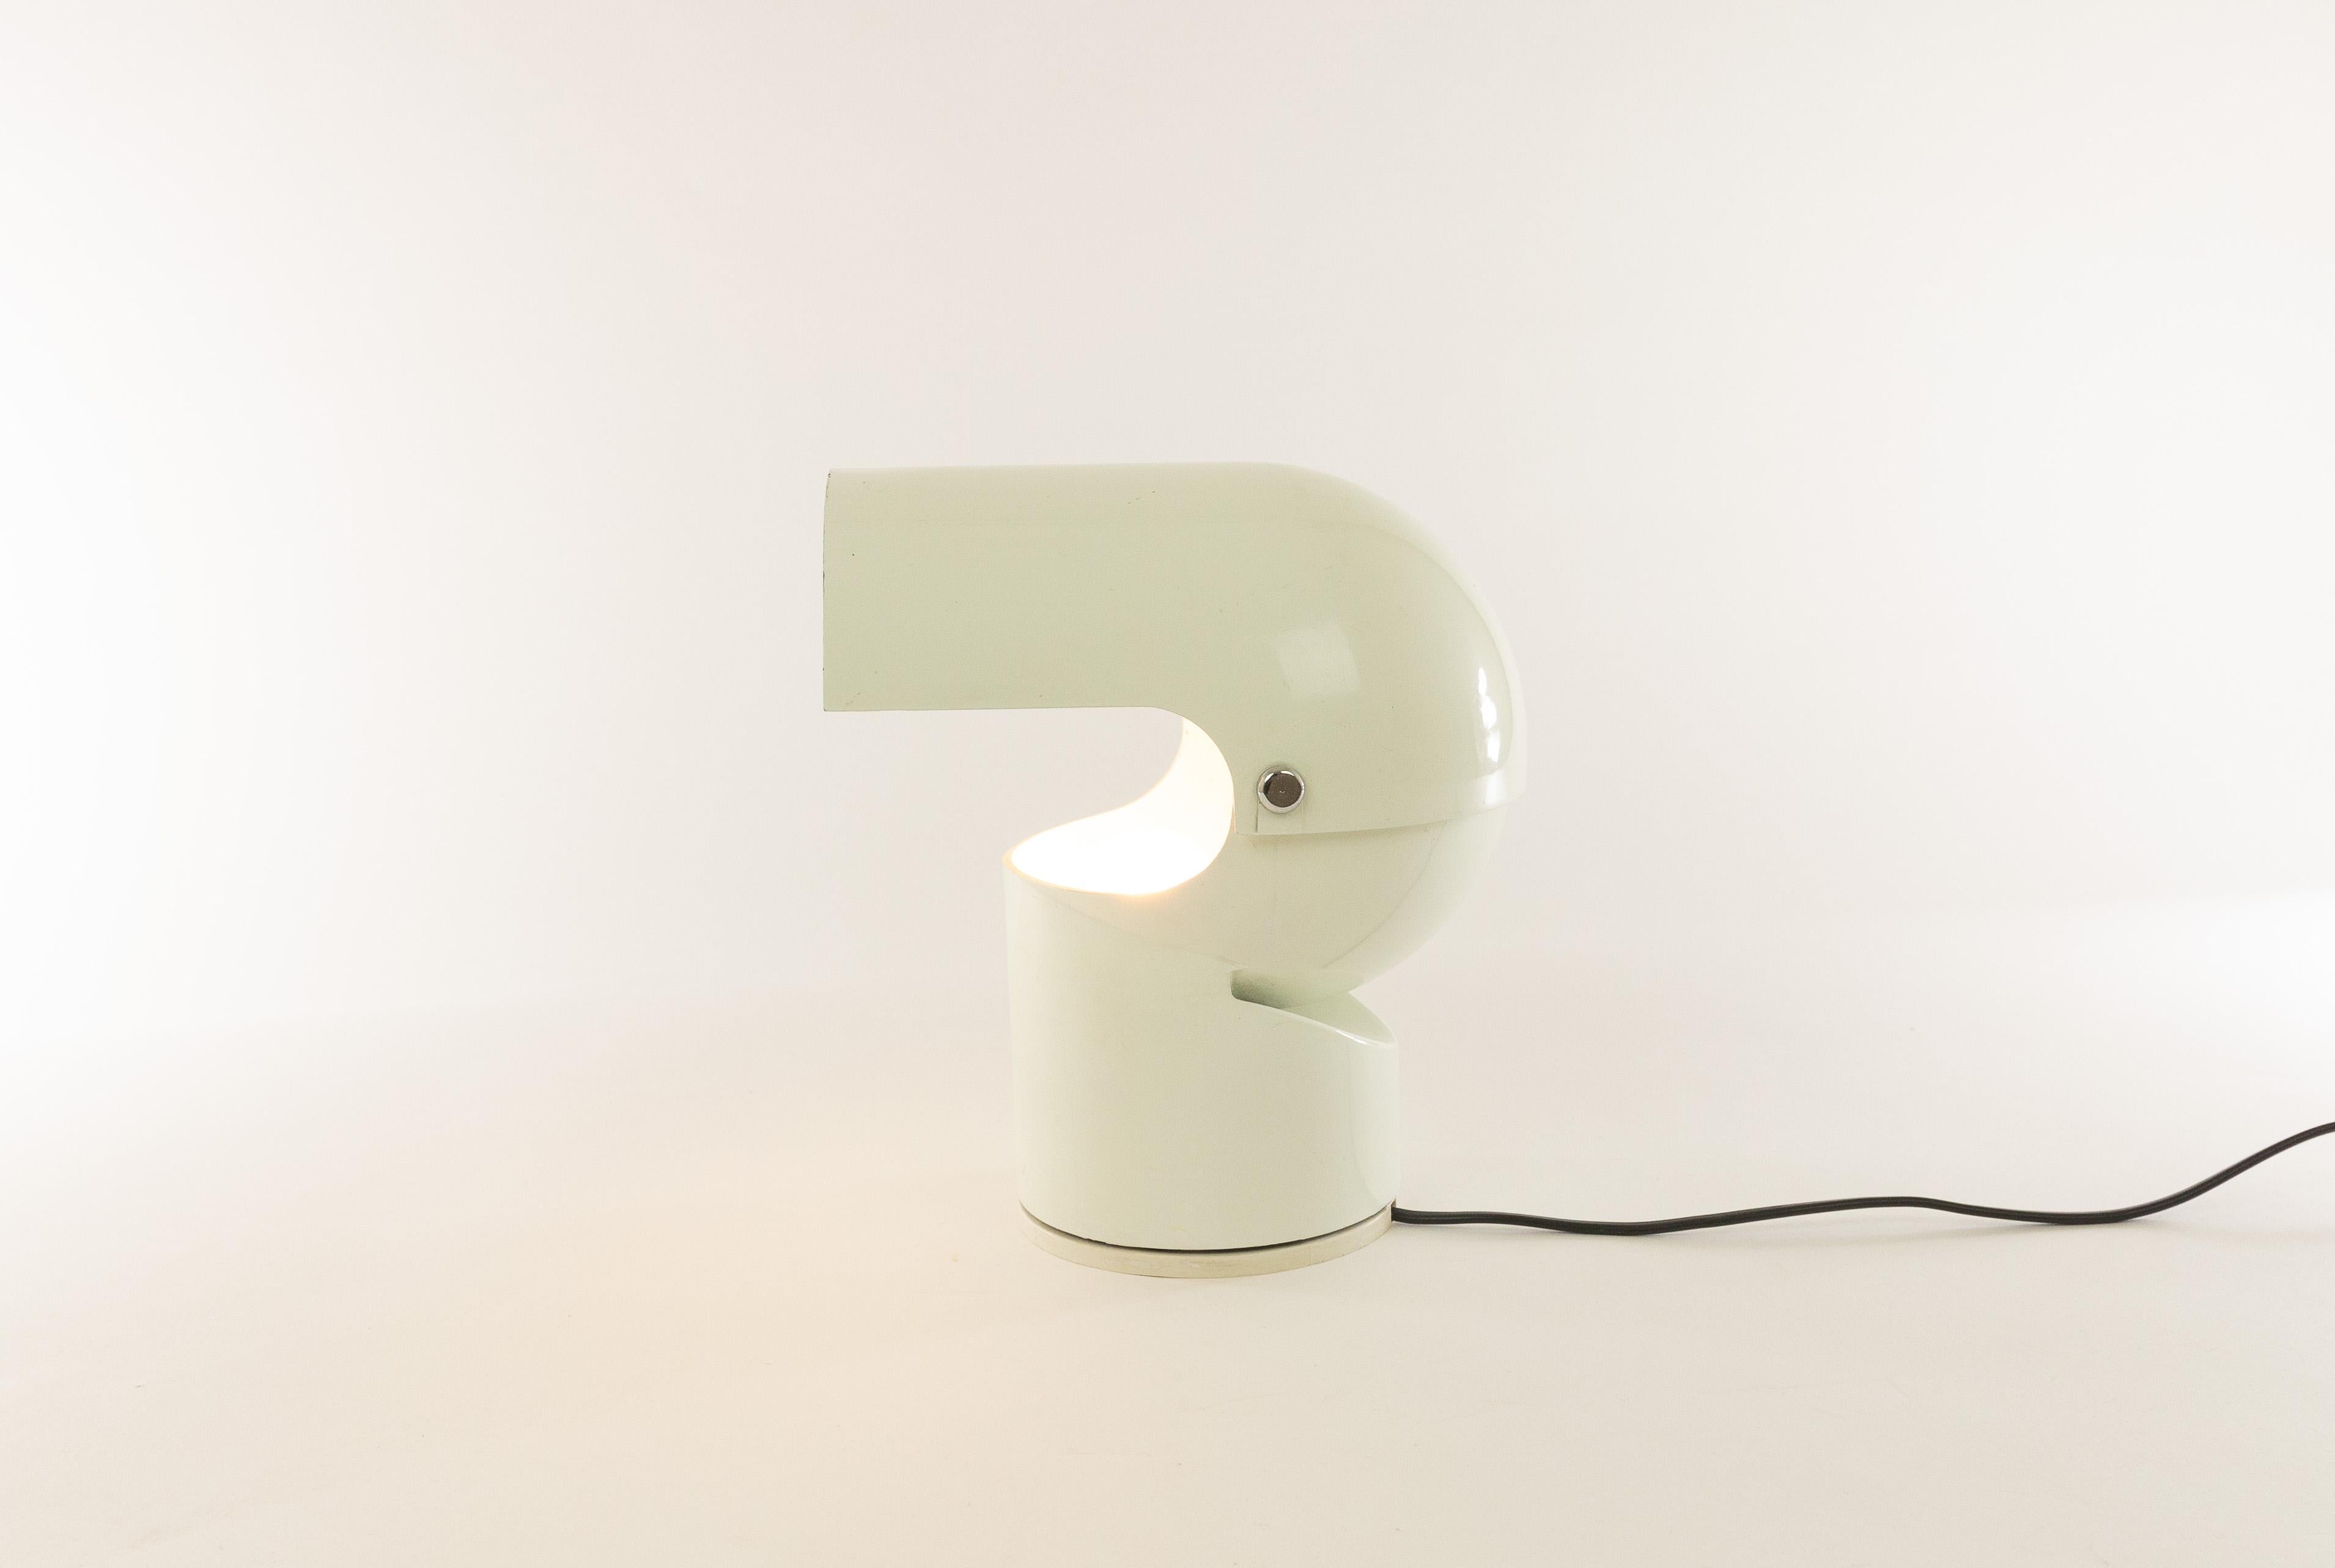 Early adjustable Pileino table lamp designed by Gae Aulenti in 1972. This lamp with sculptural quality is made in white lacquered metal with a plastic base. It was in production in the 1970s by Italian lighting manufacturer Artemide.

The lamp has